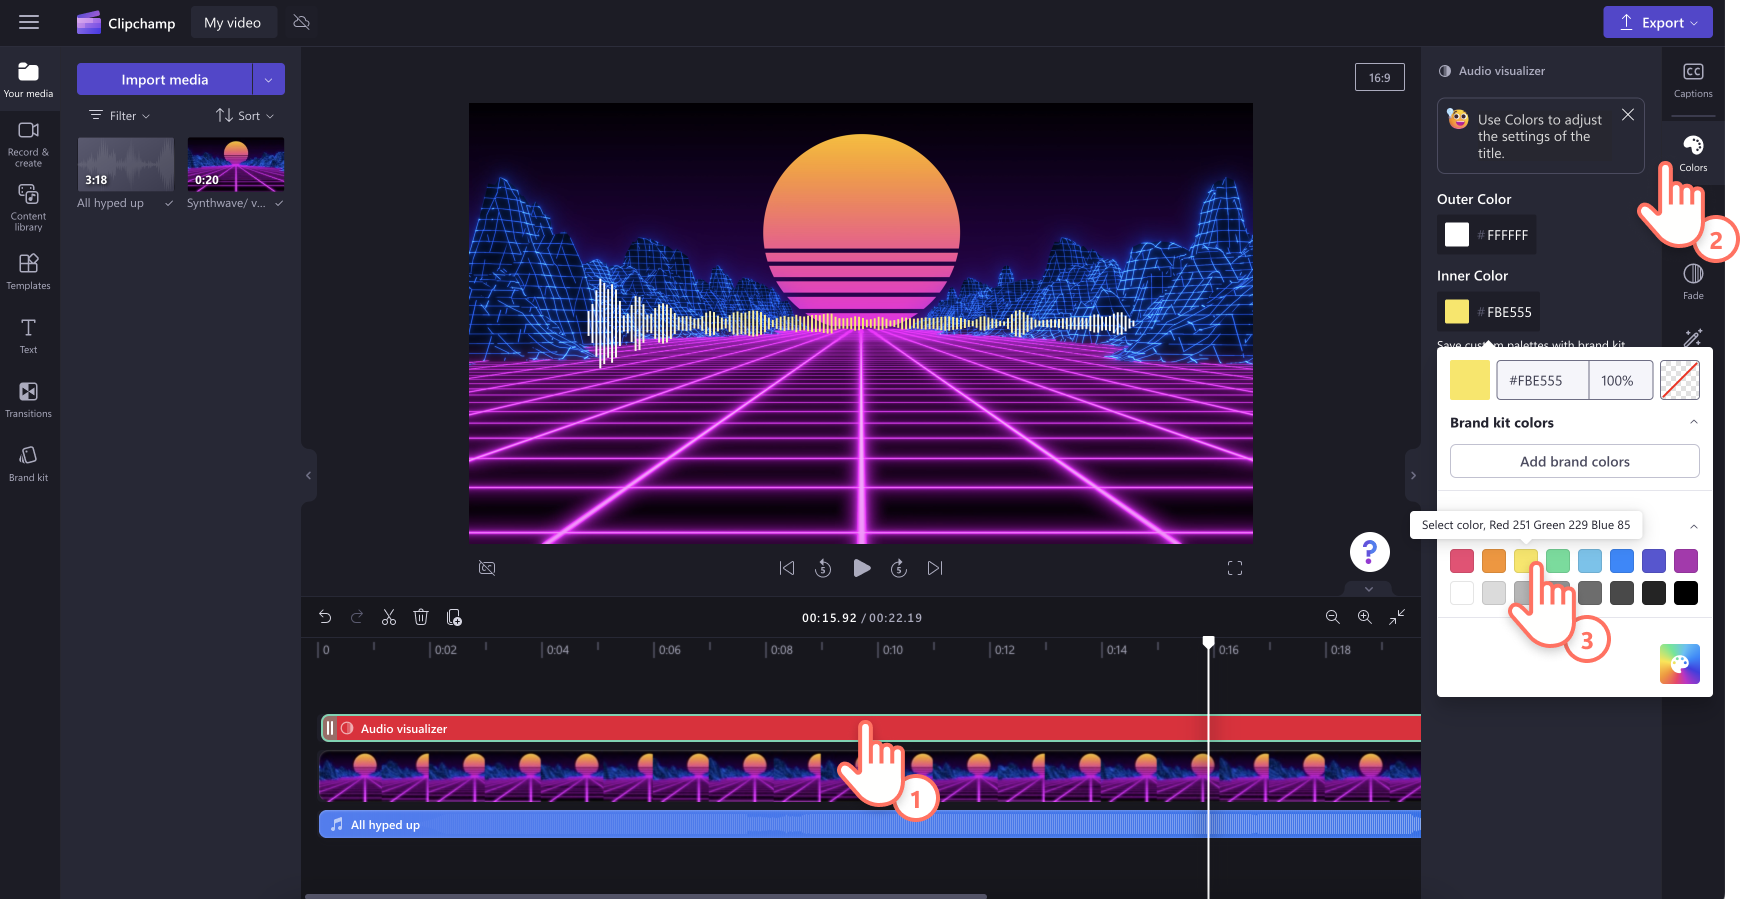 Customise the colors of the visualizer